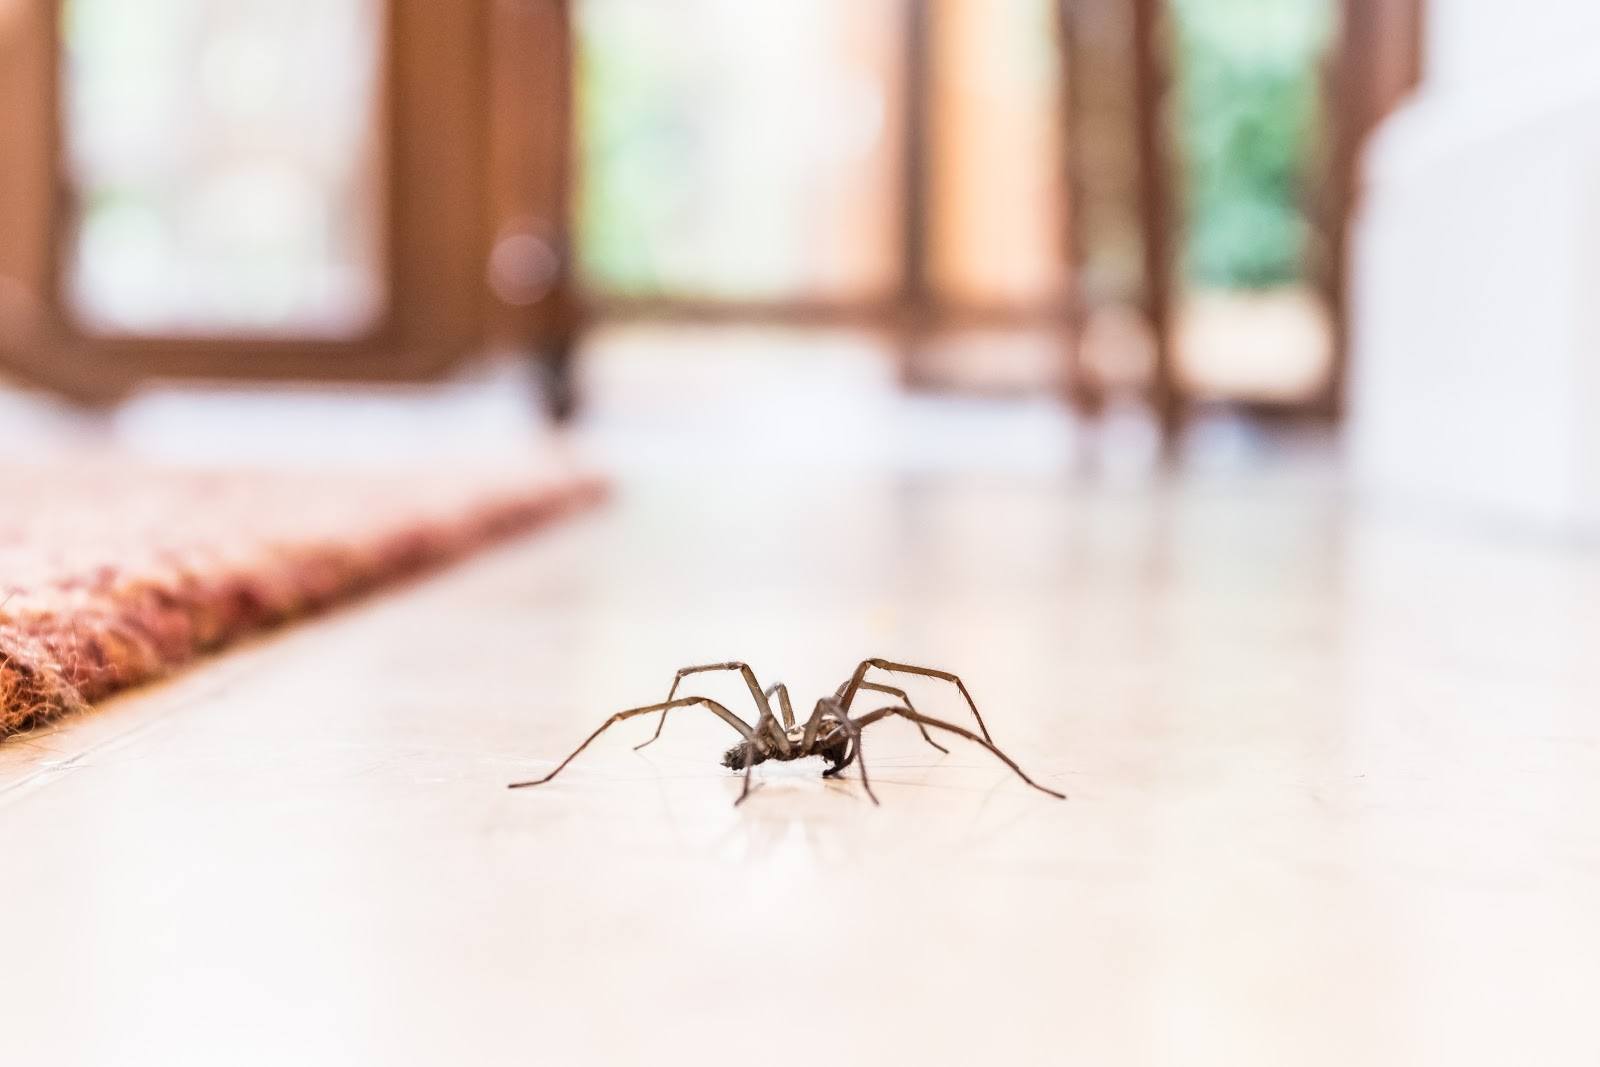 How To Reduce Spider Presence